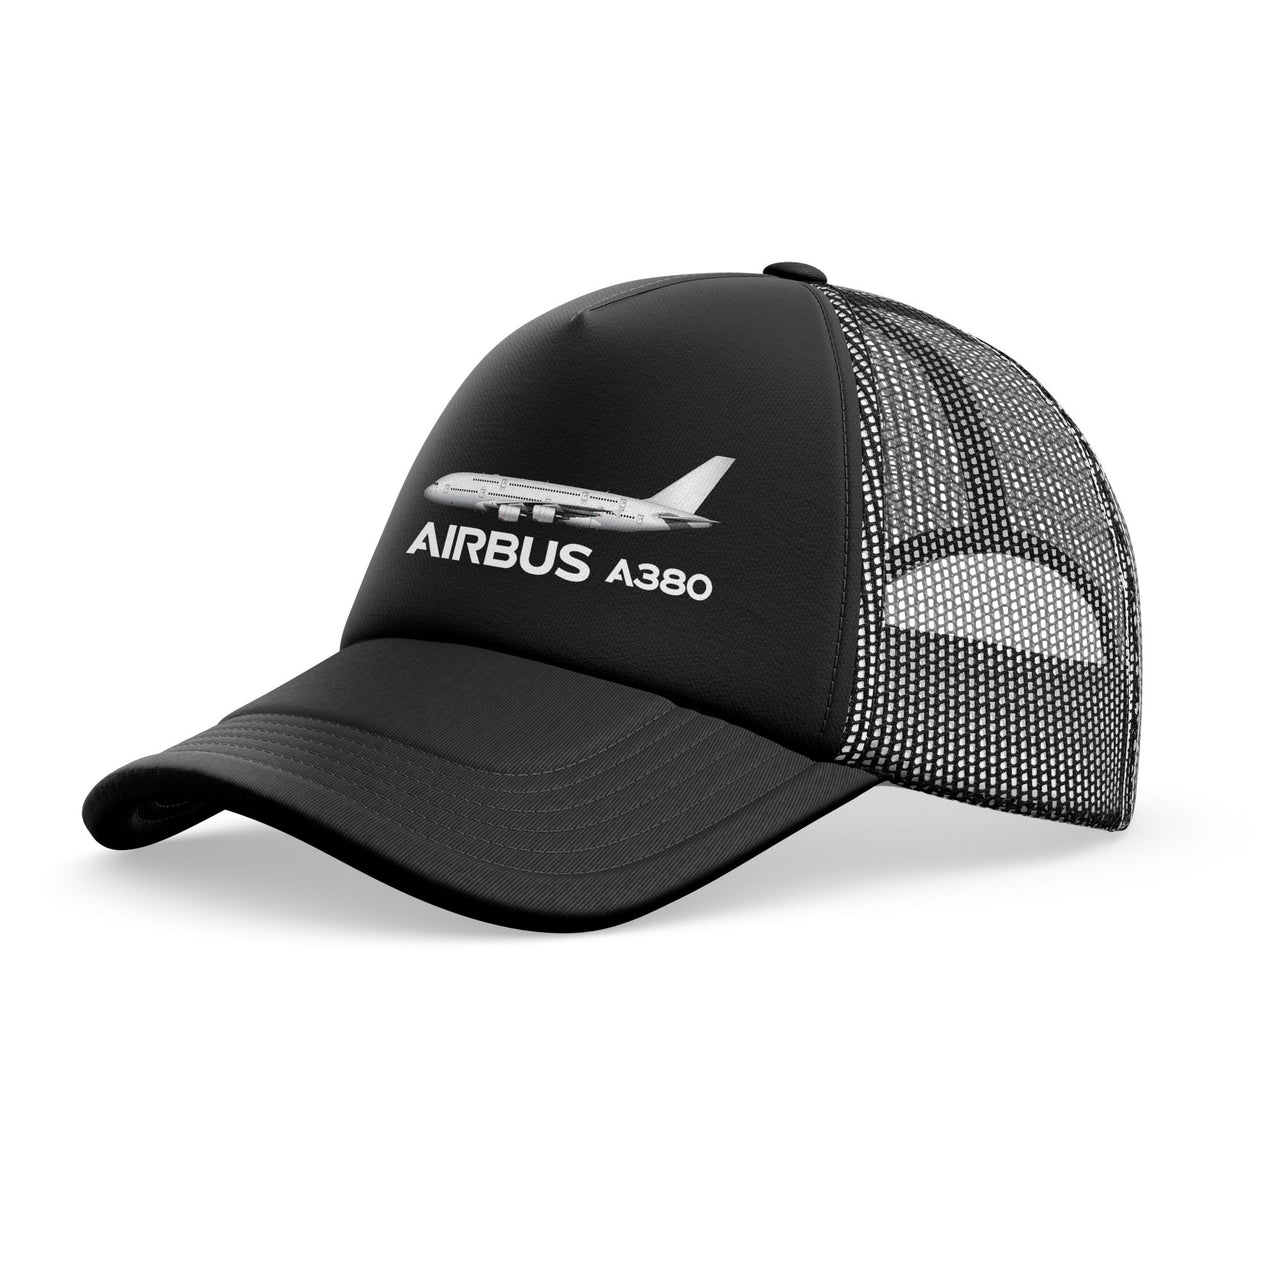 The Airbus A380 Designed Trucker Caps & Hats